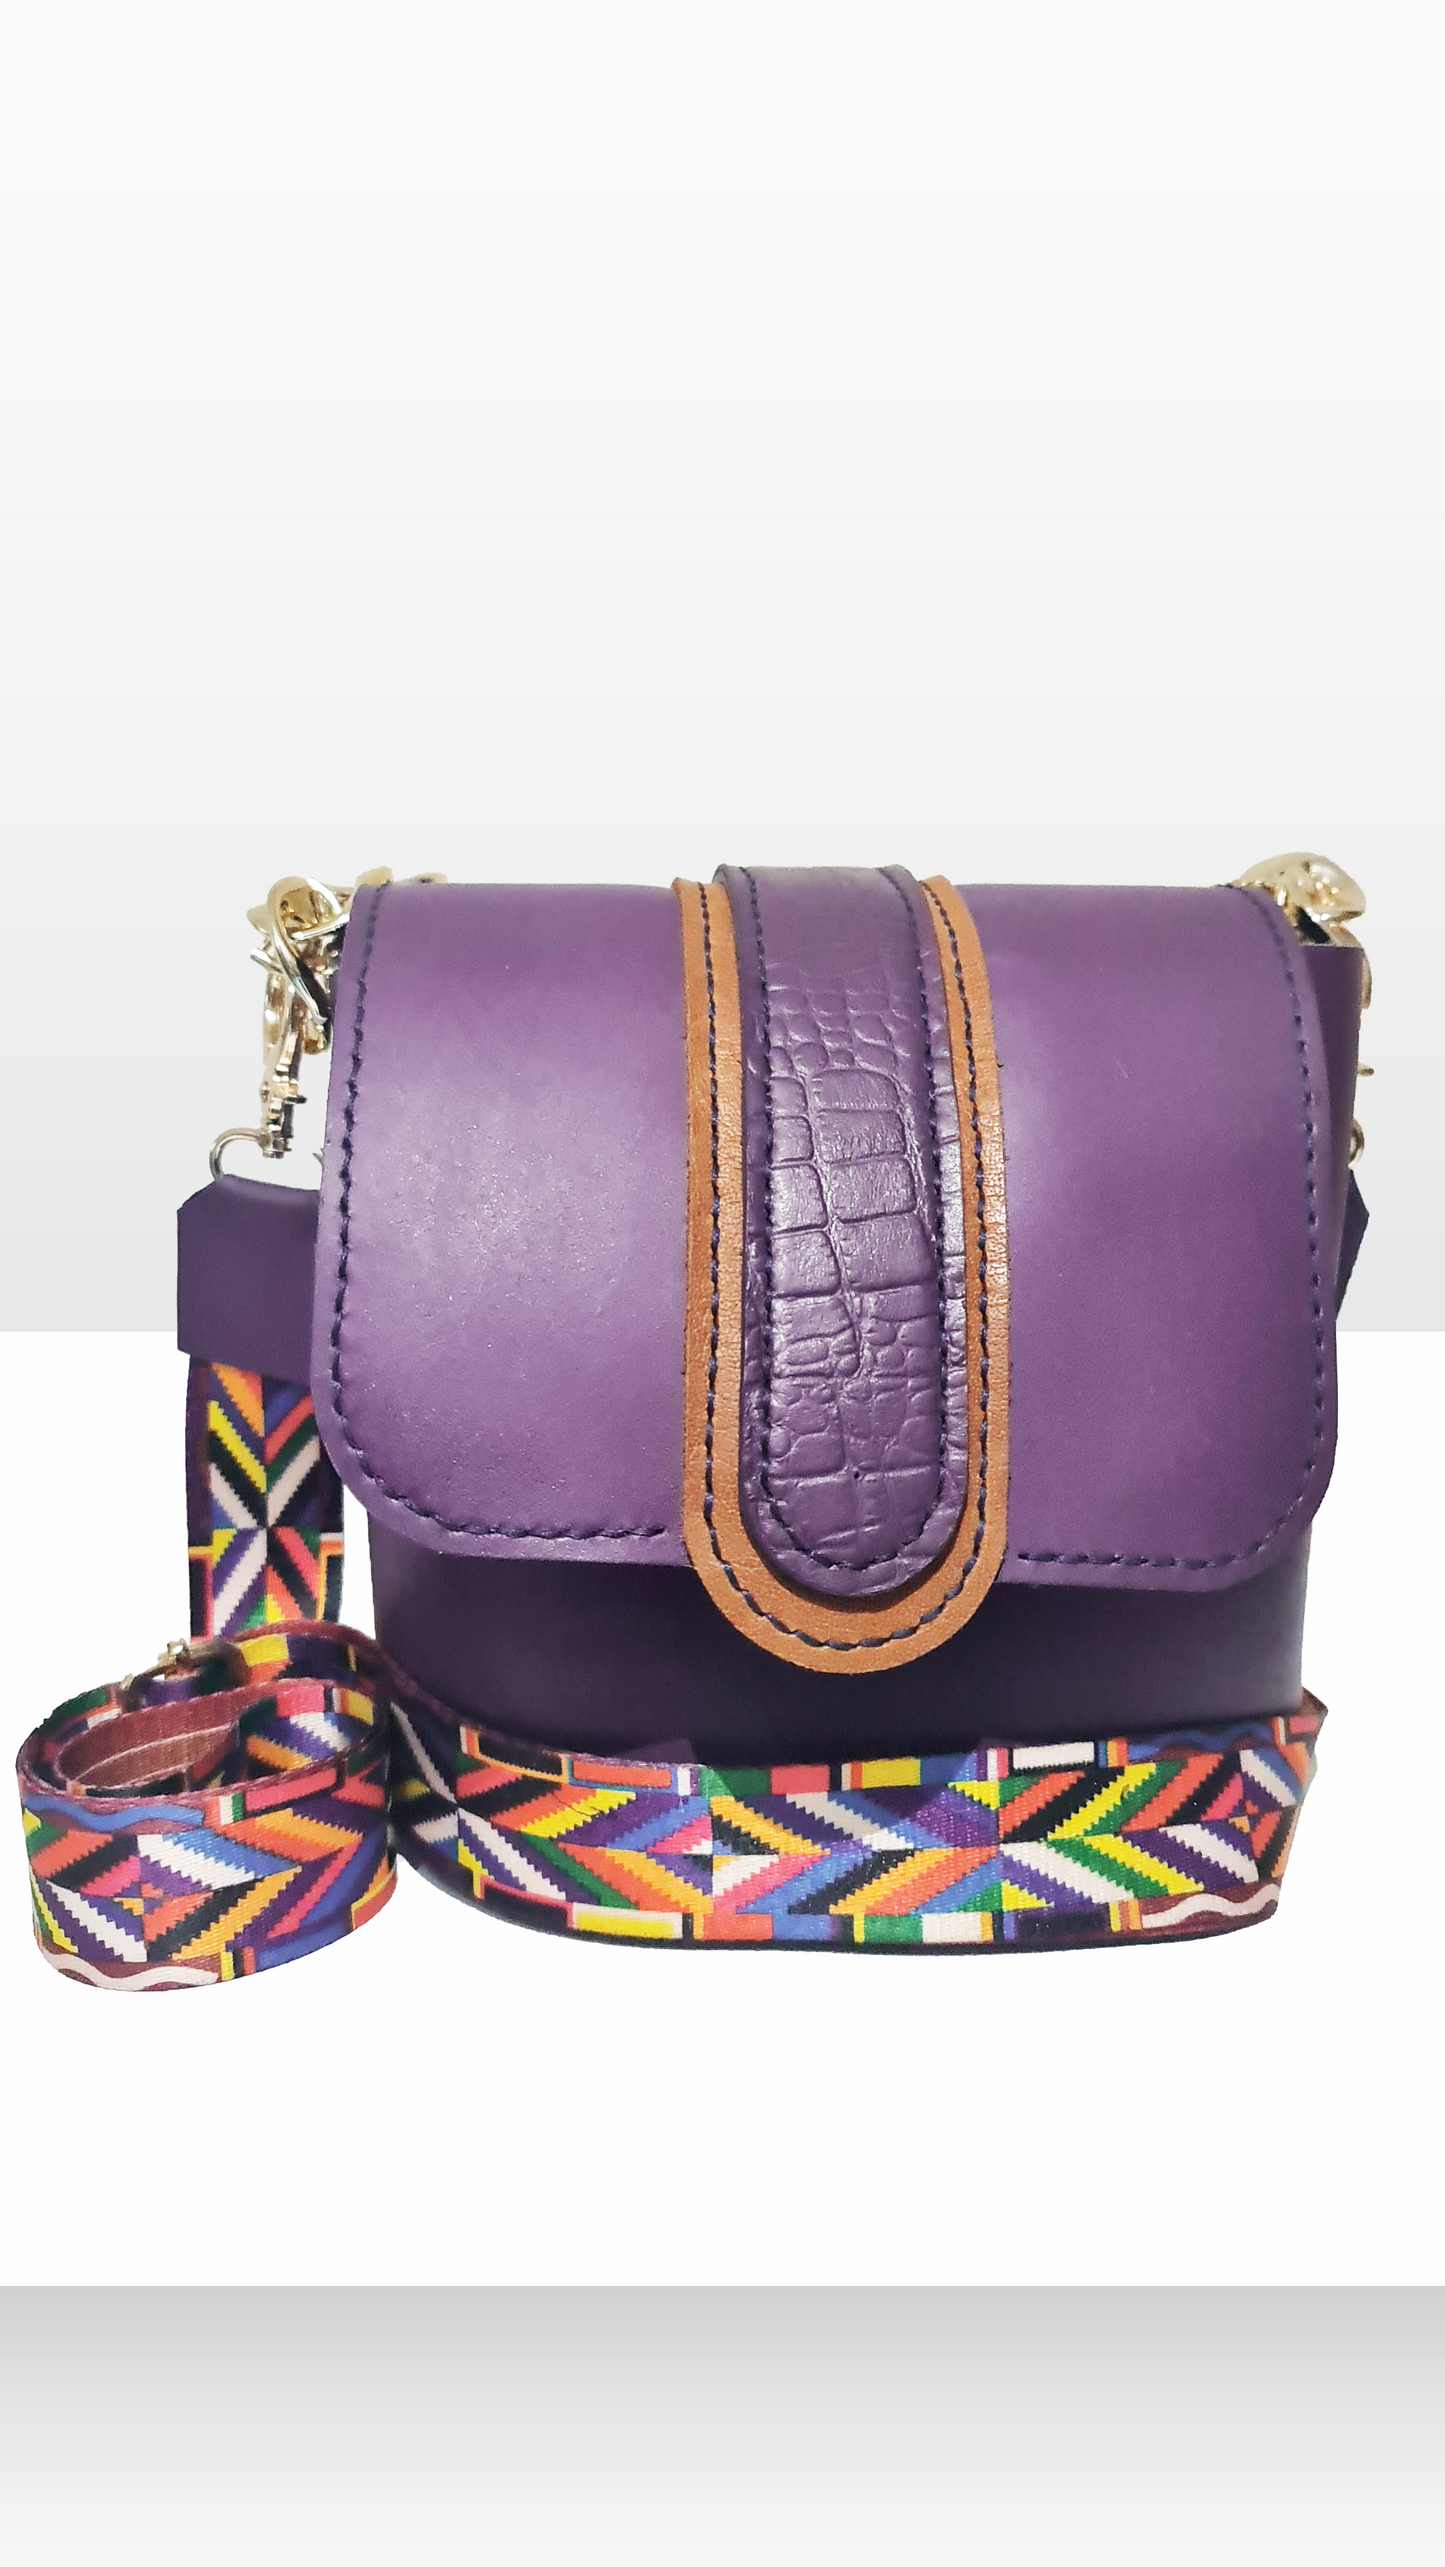 Trendy purple bag with a gold chain handle & long strap